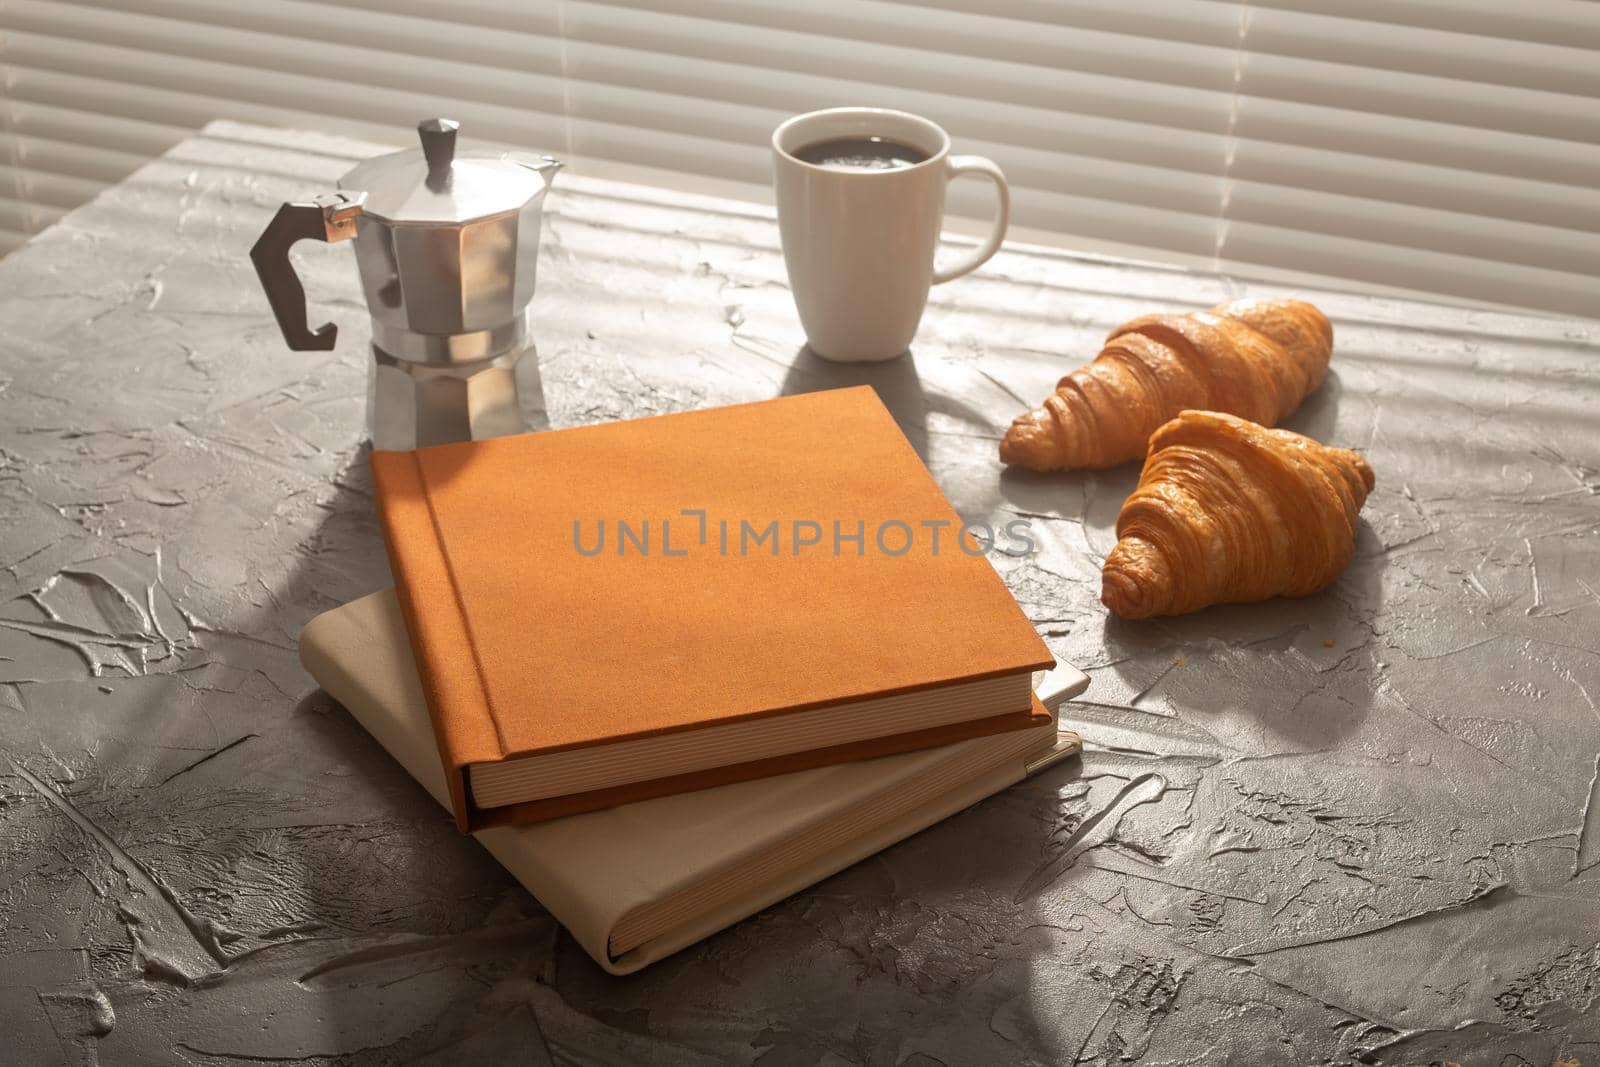 Still life for pleasant morning coffee turk cup and croissants with two books on the table. Lunch break or start the morning